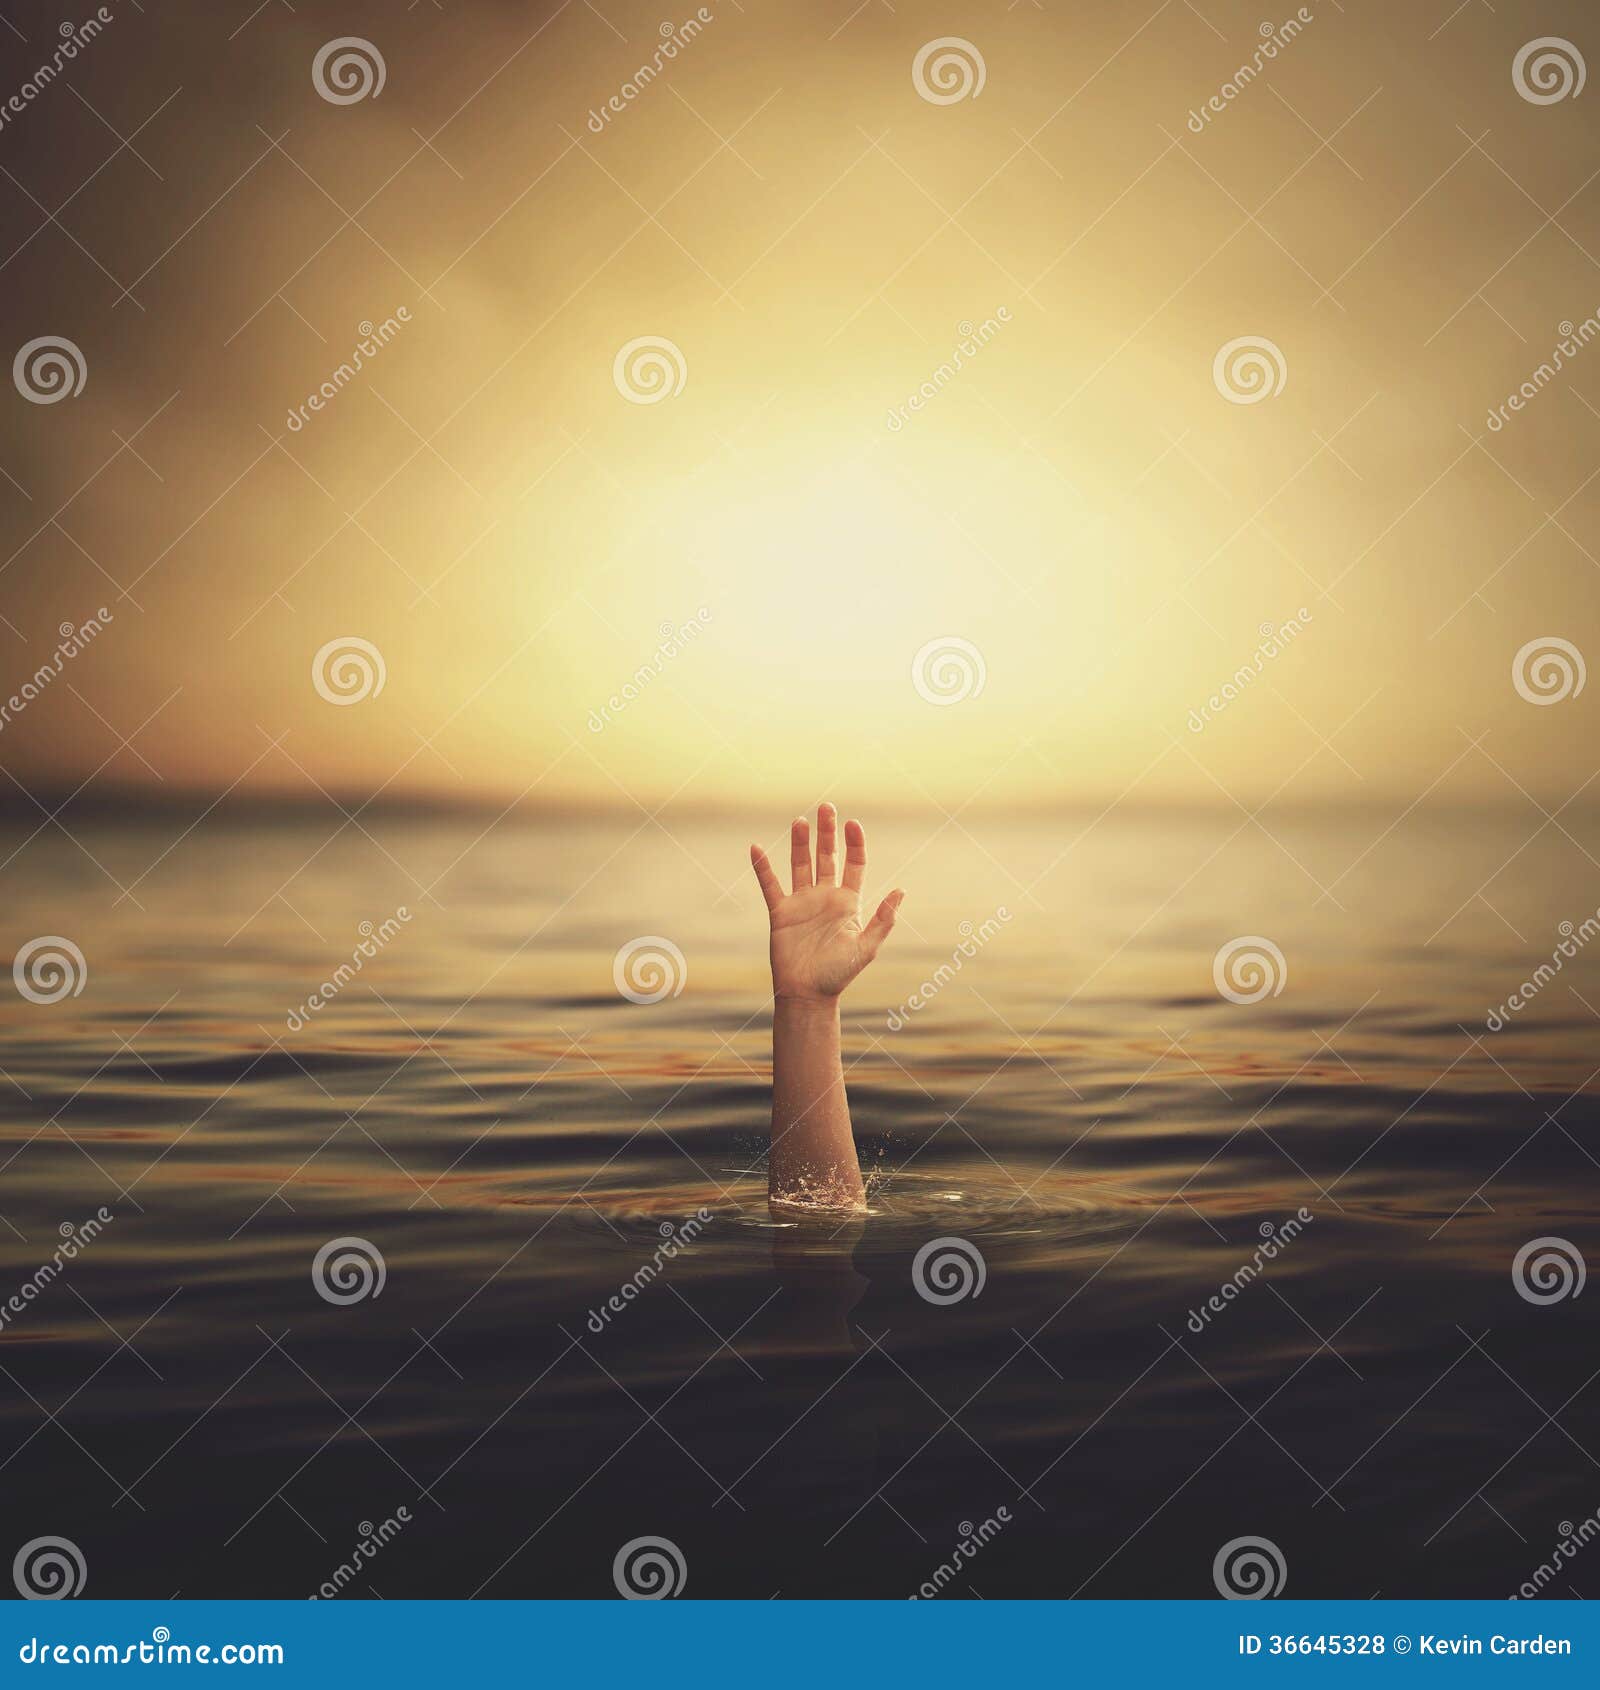 a hand coming out of the water